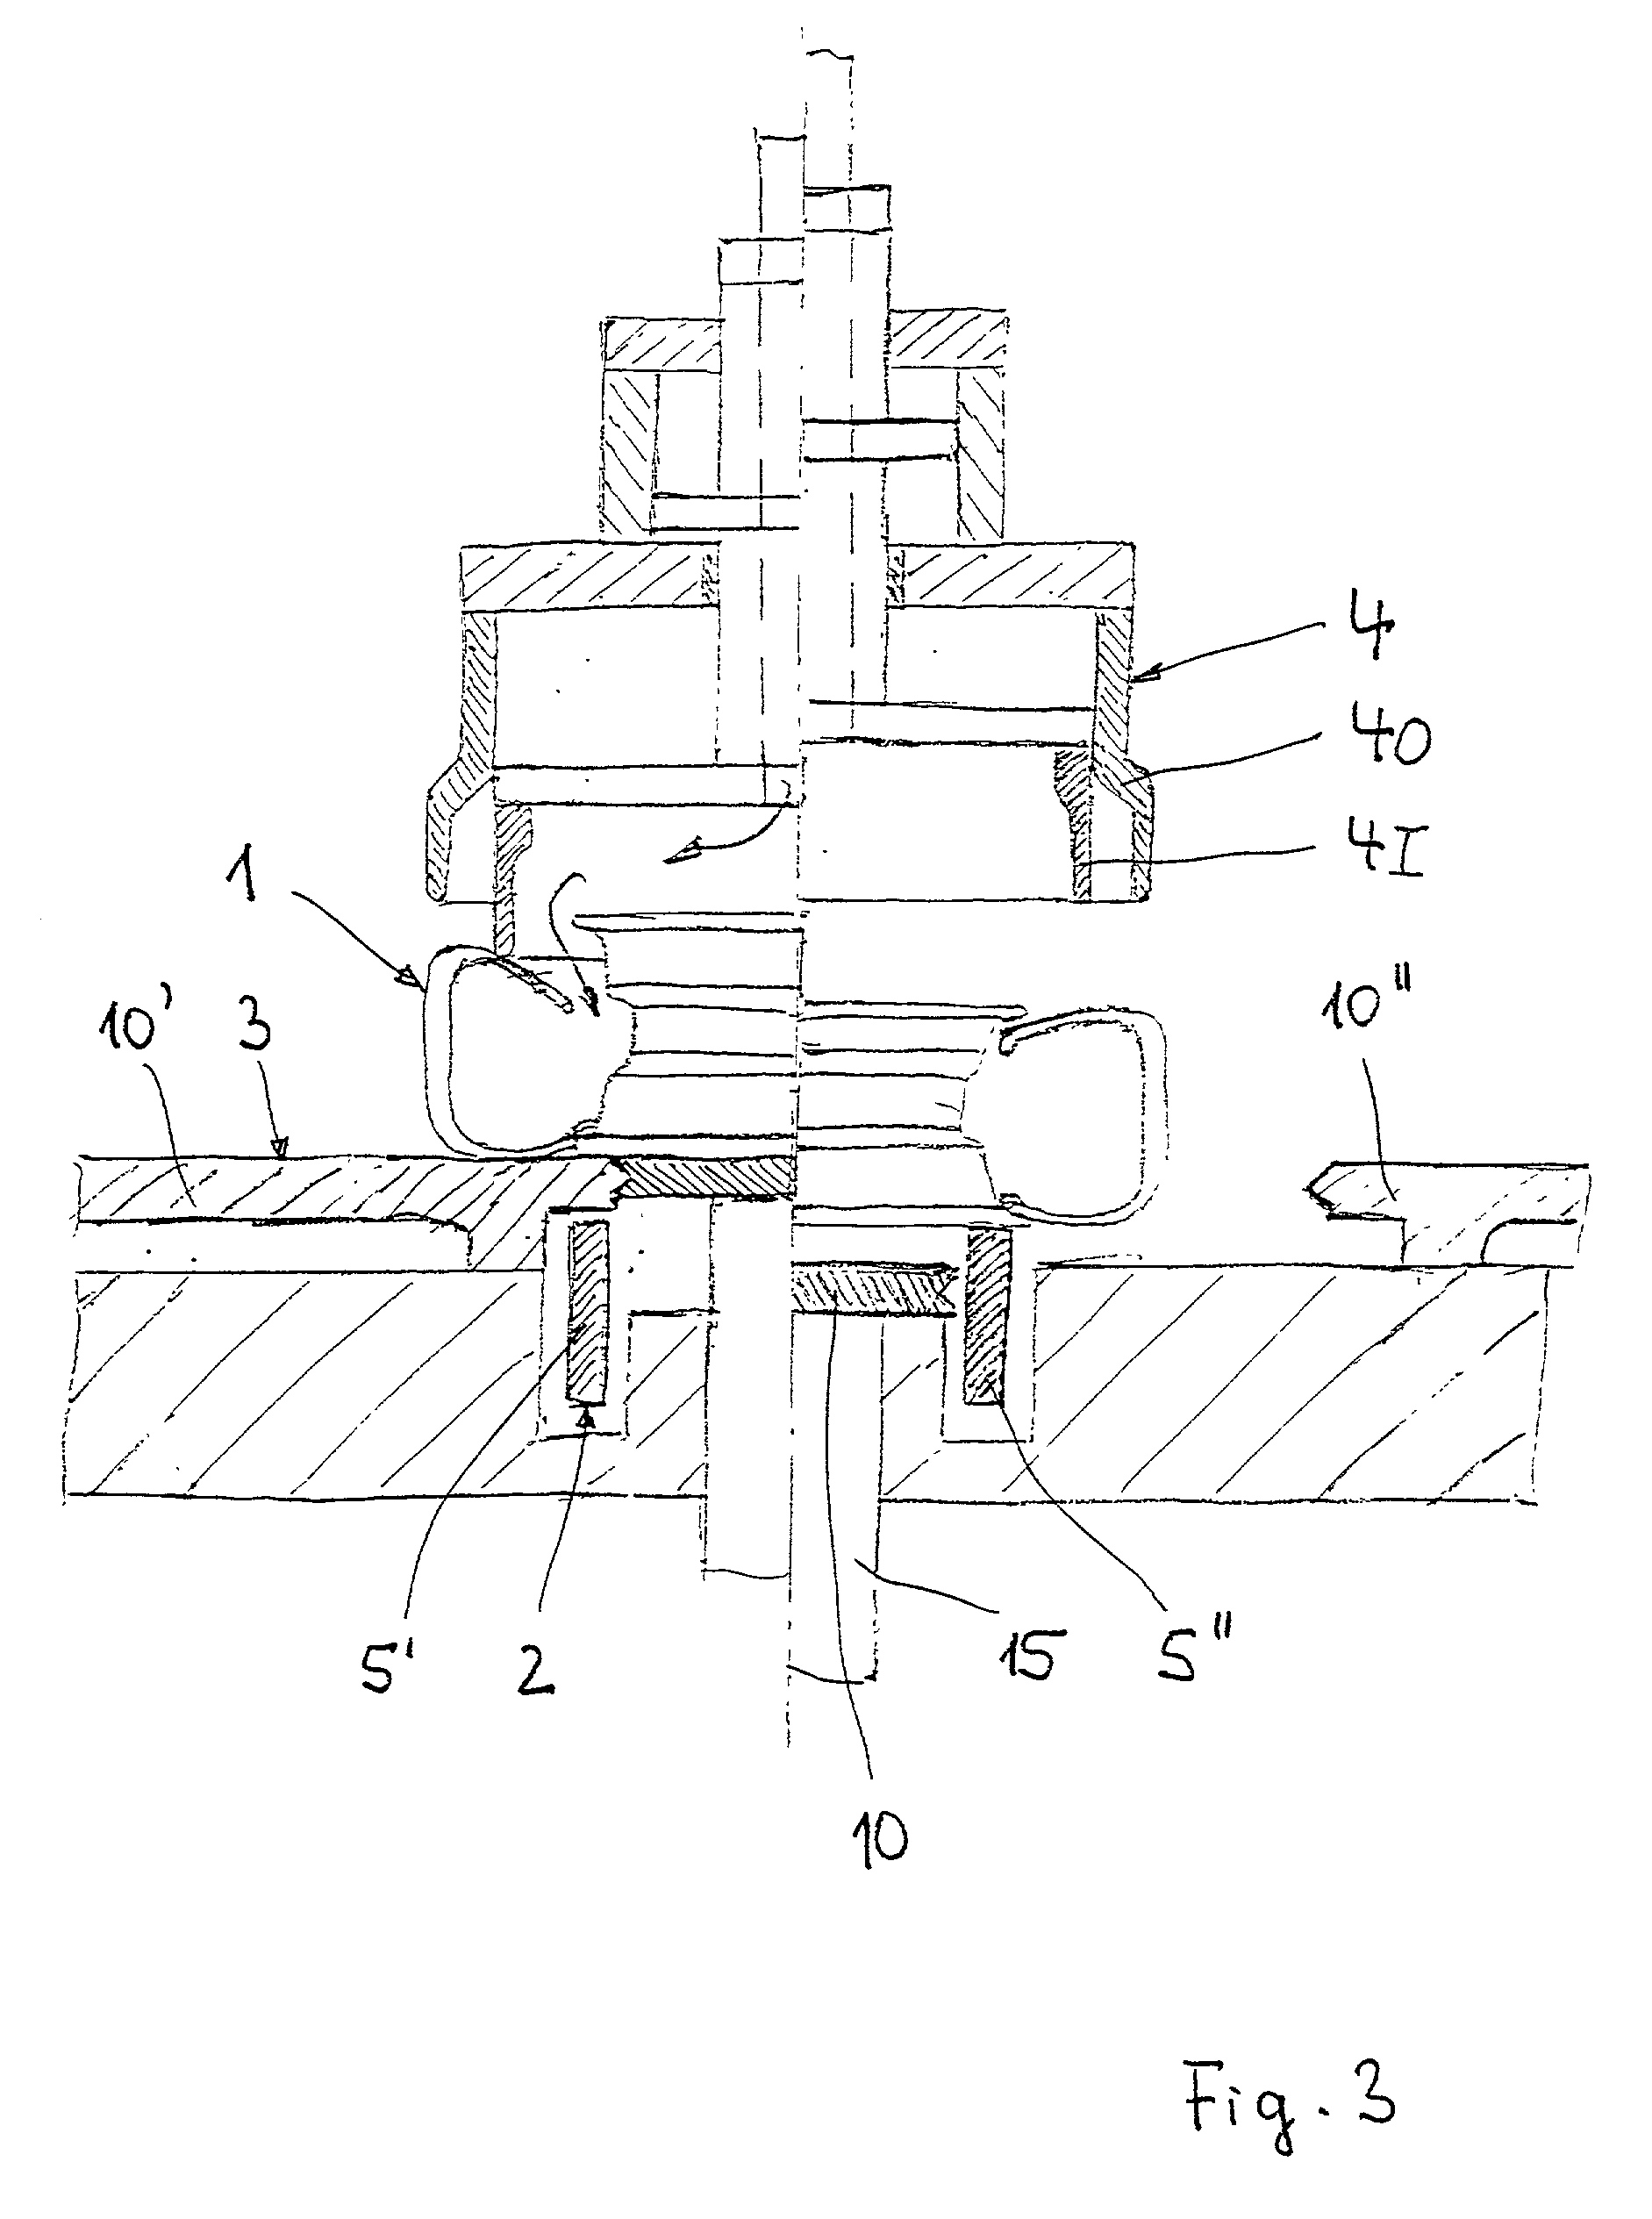 Tire filling method and apparatus adaptable to different sizes of tires